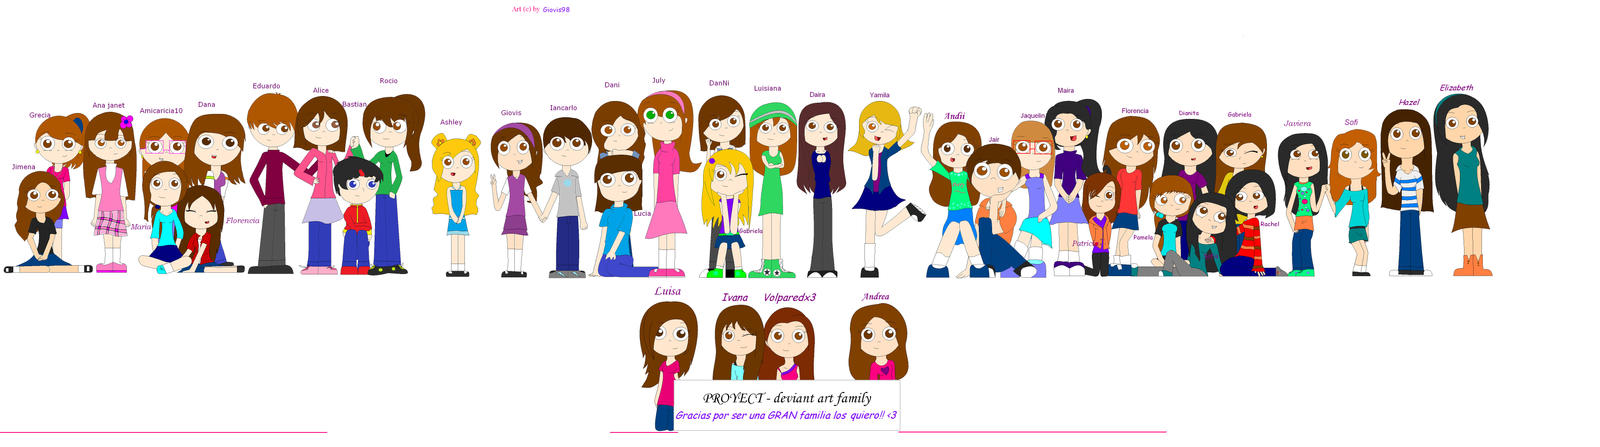 Proyect- Deviant Art Familiy- incompleto